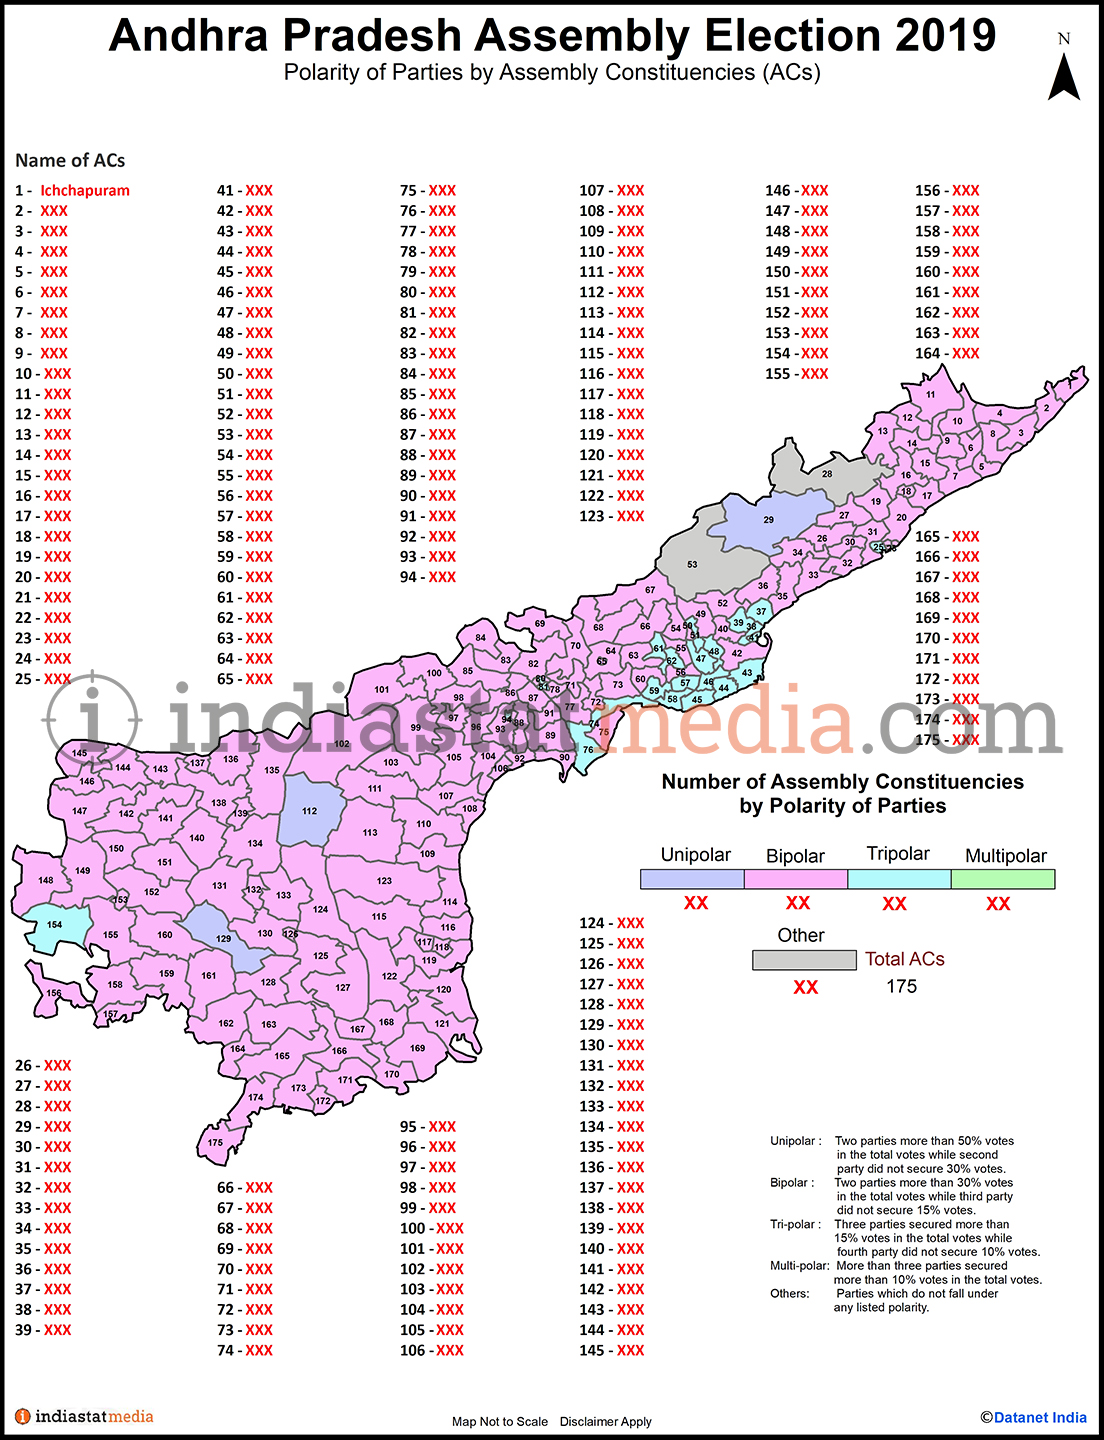 Polarity of Parties by Assembly Constituencies in Andhra Pradesh (Assembly Election - 2019)